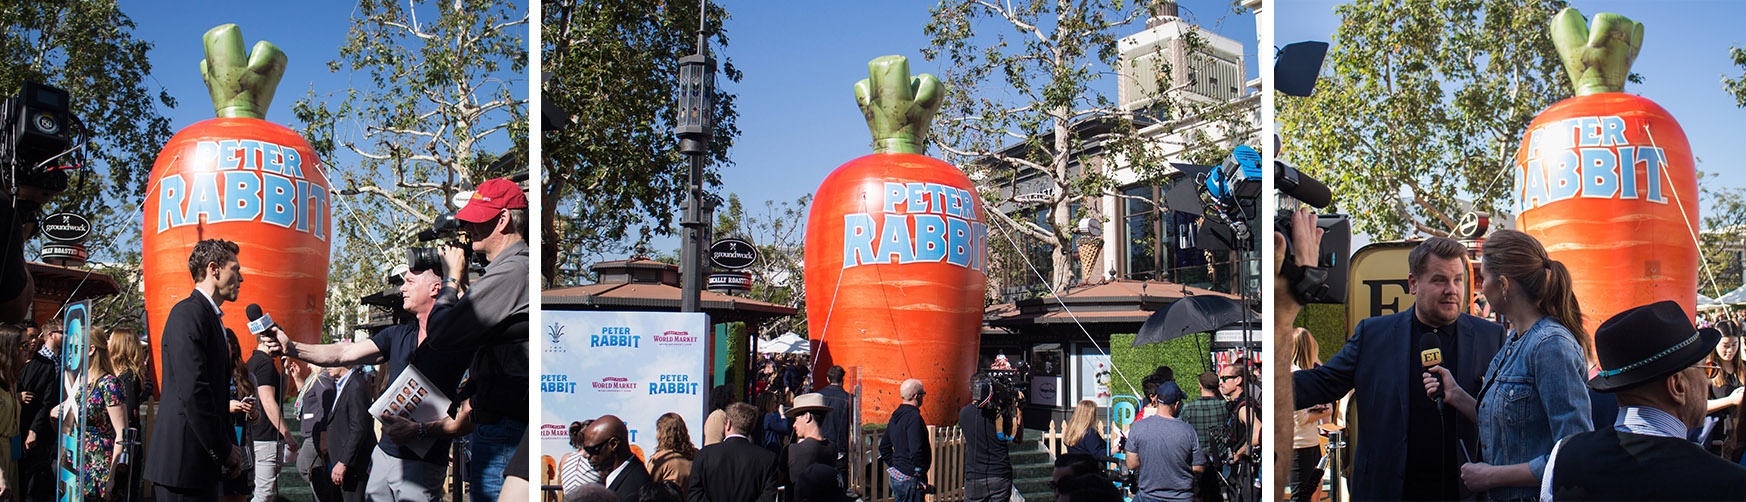 Peter Rabbit inflatable carrot installed at the grove for the premier of the Peter Rabbit movie- Header for Custom Inflatables